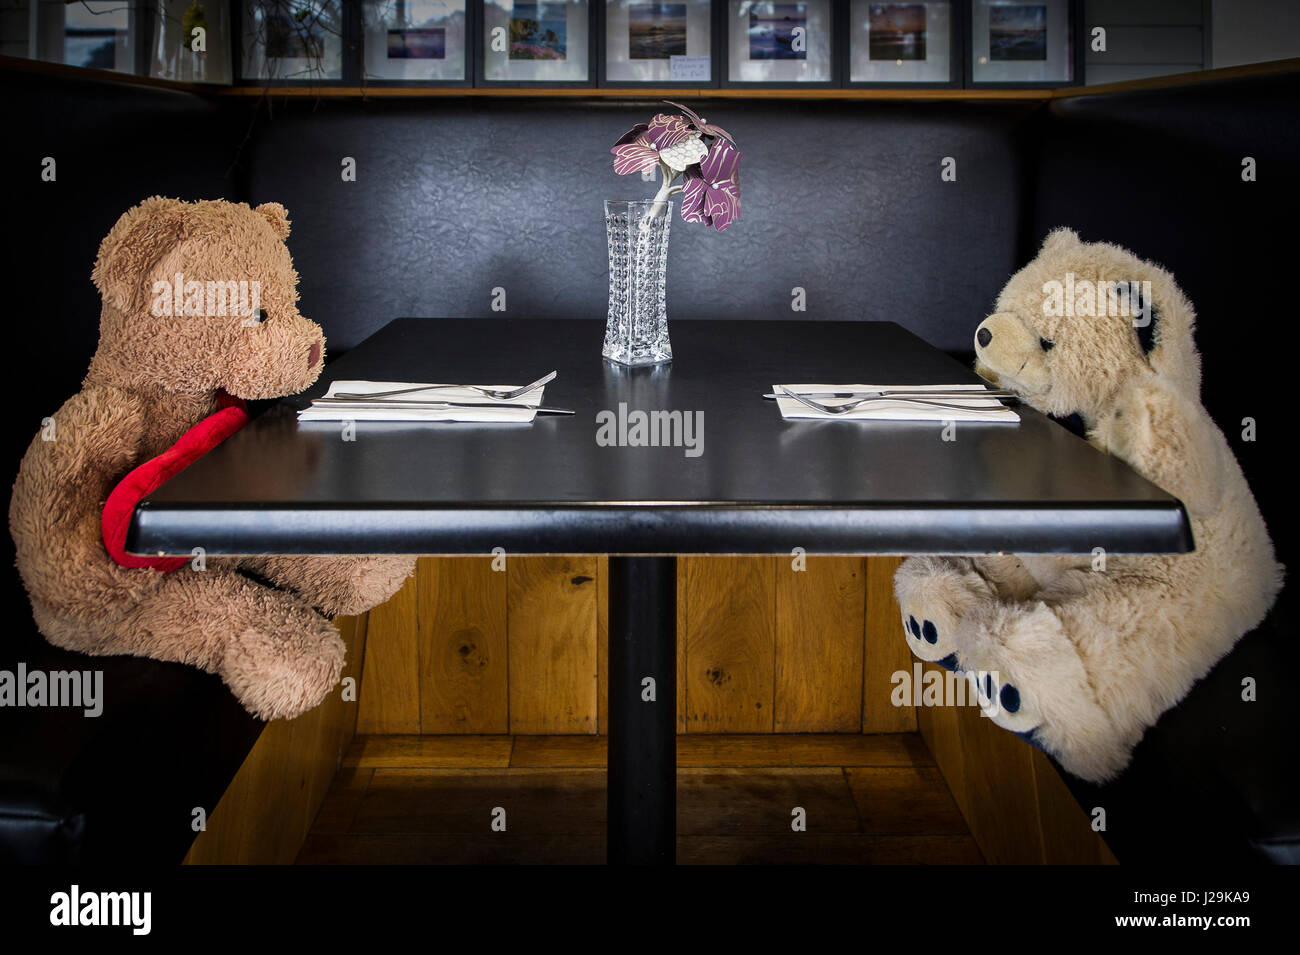 Restaurant Teddy bears Tables Cute Interior Waiting to be served Stock Photo